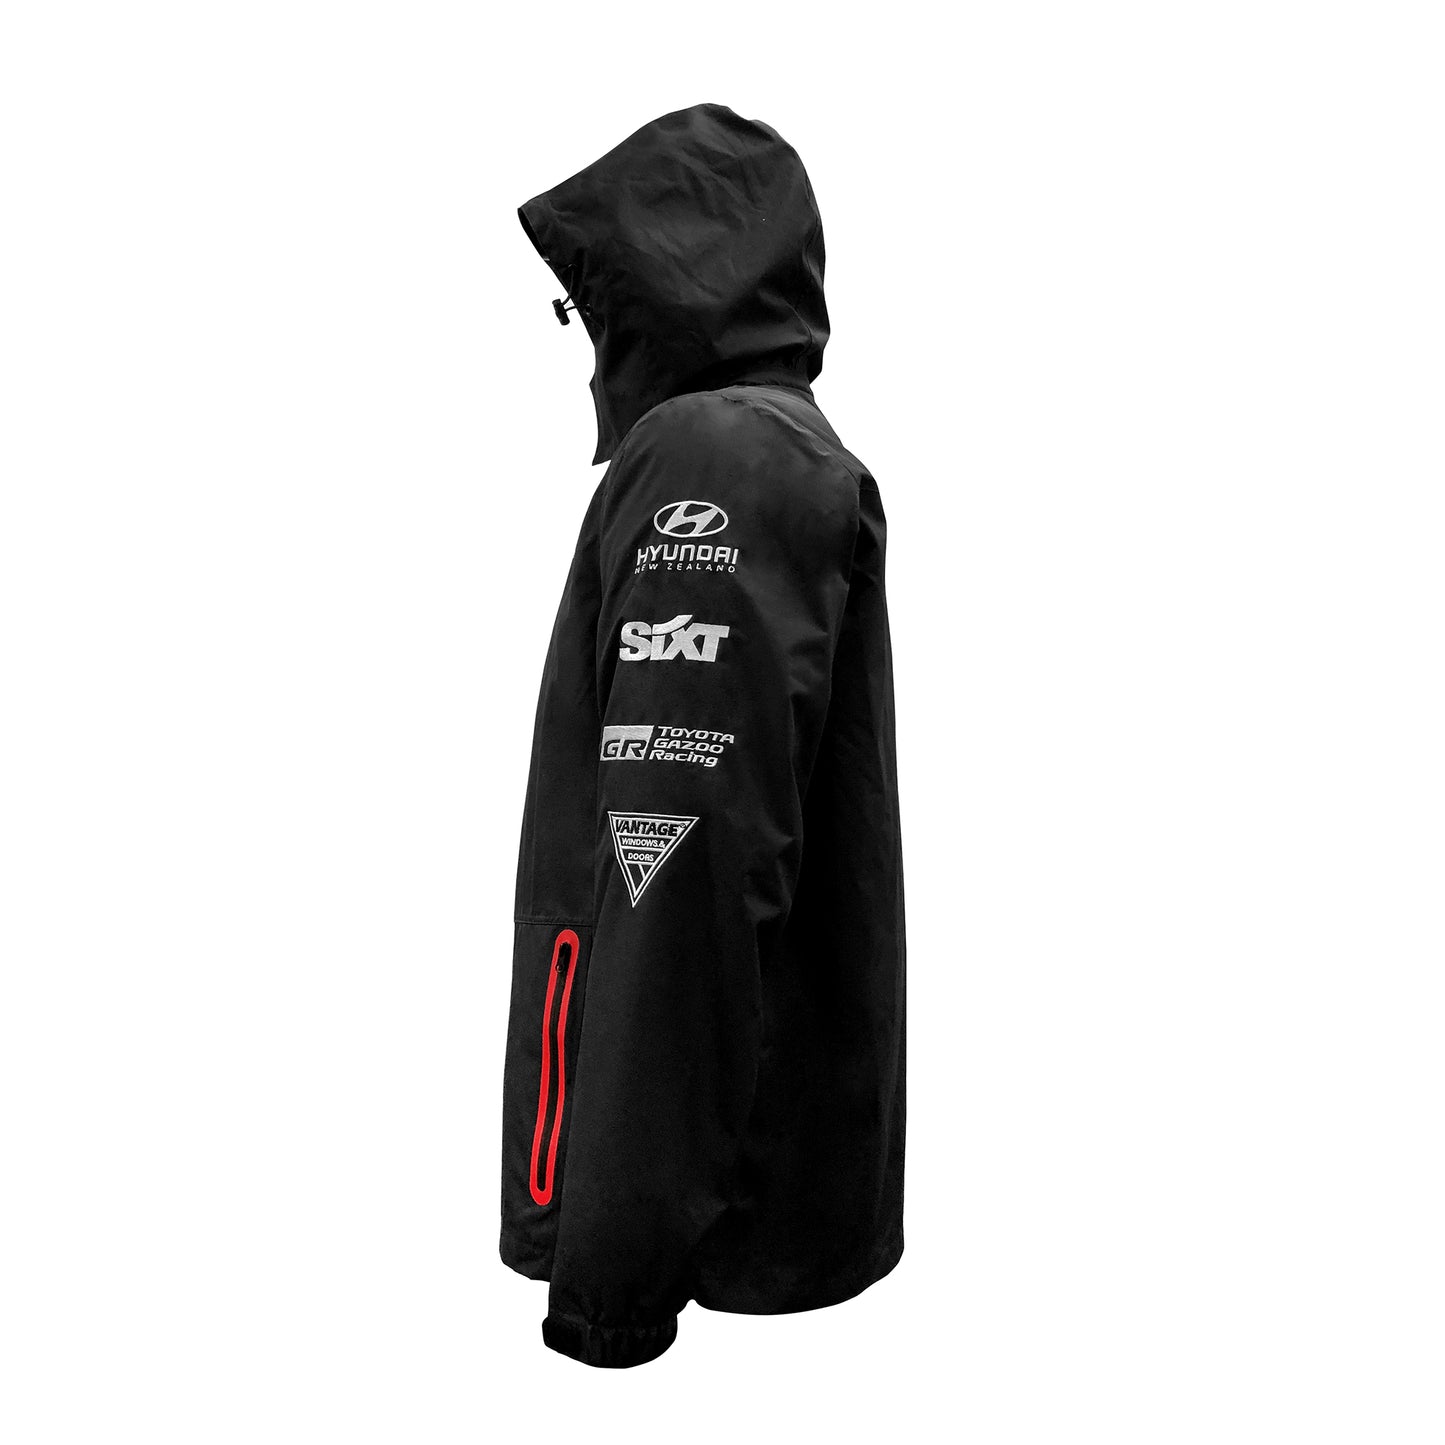 Repco Rally of New Zealand Shakedown Jacket  - Price Reduction $99 while stocks lasts